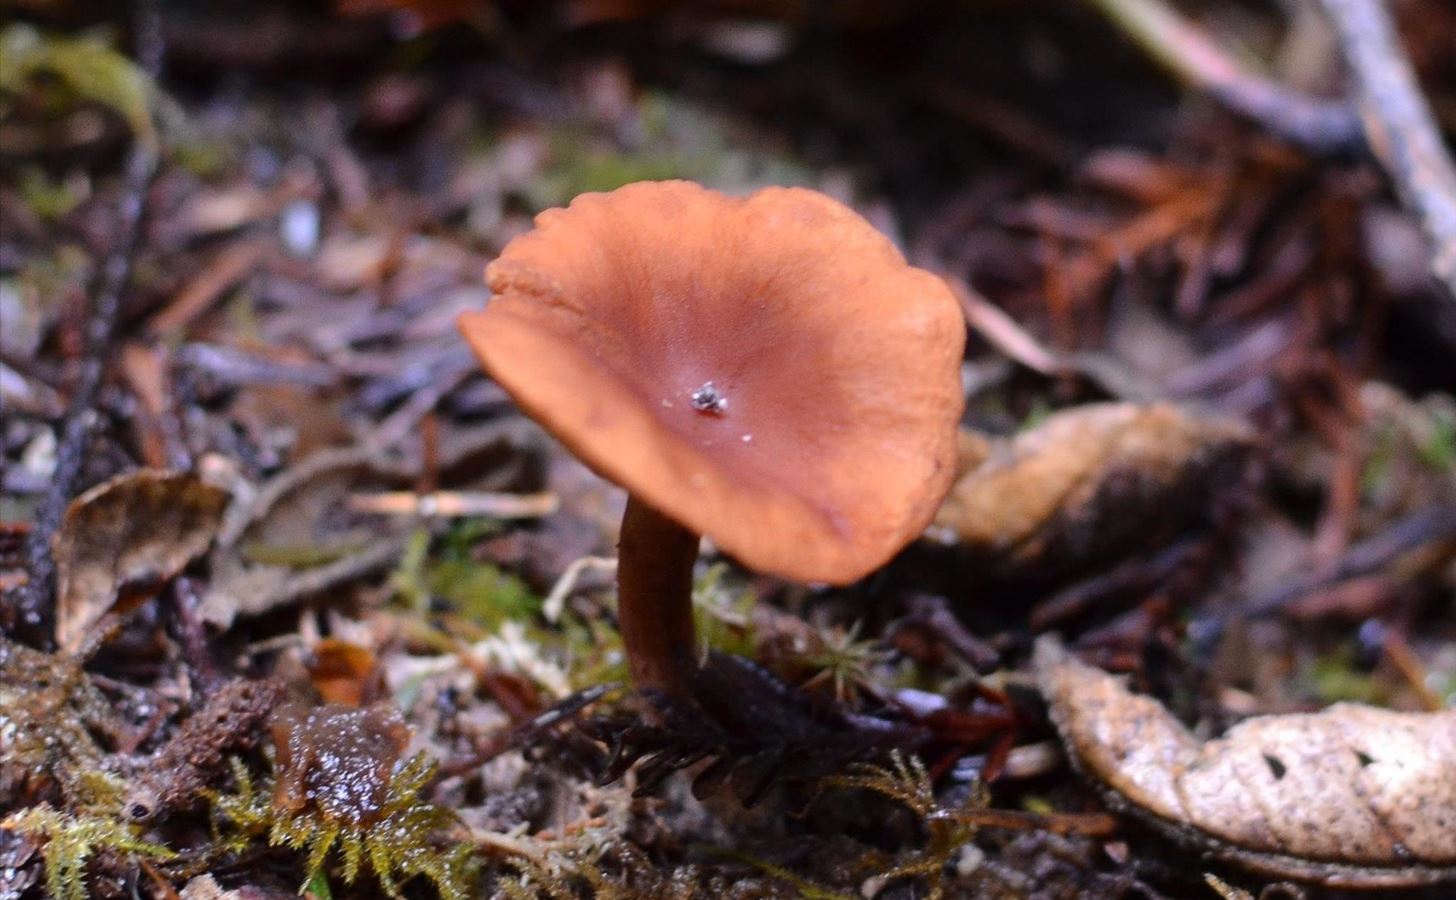 Weird Ingredient Wednesday: The Mushroom That Tastes Like Candy